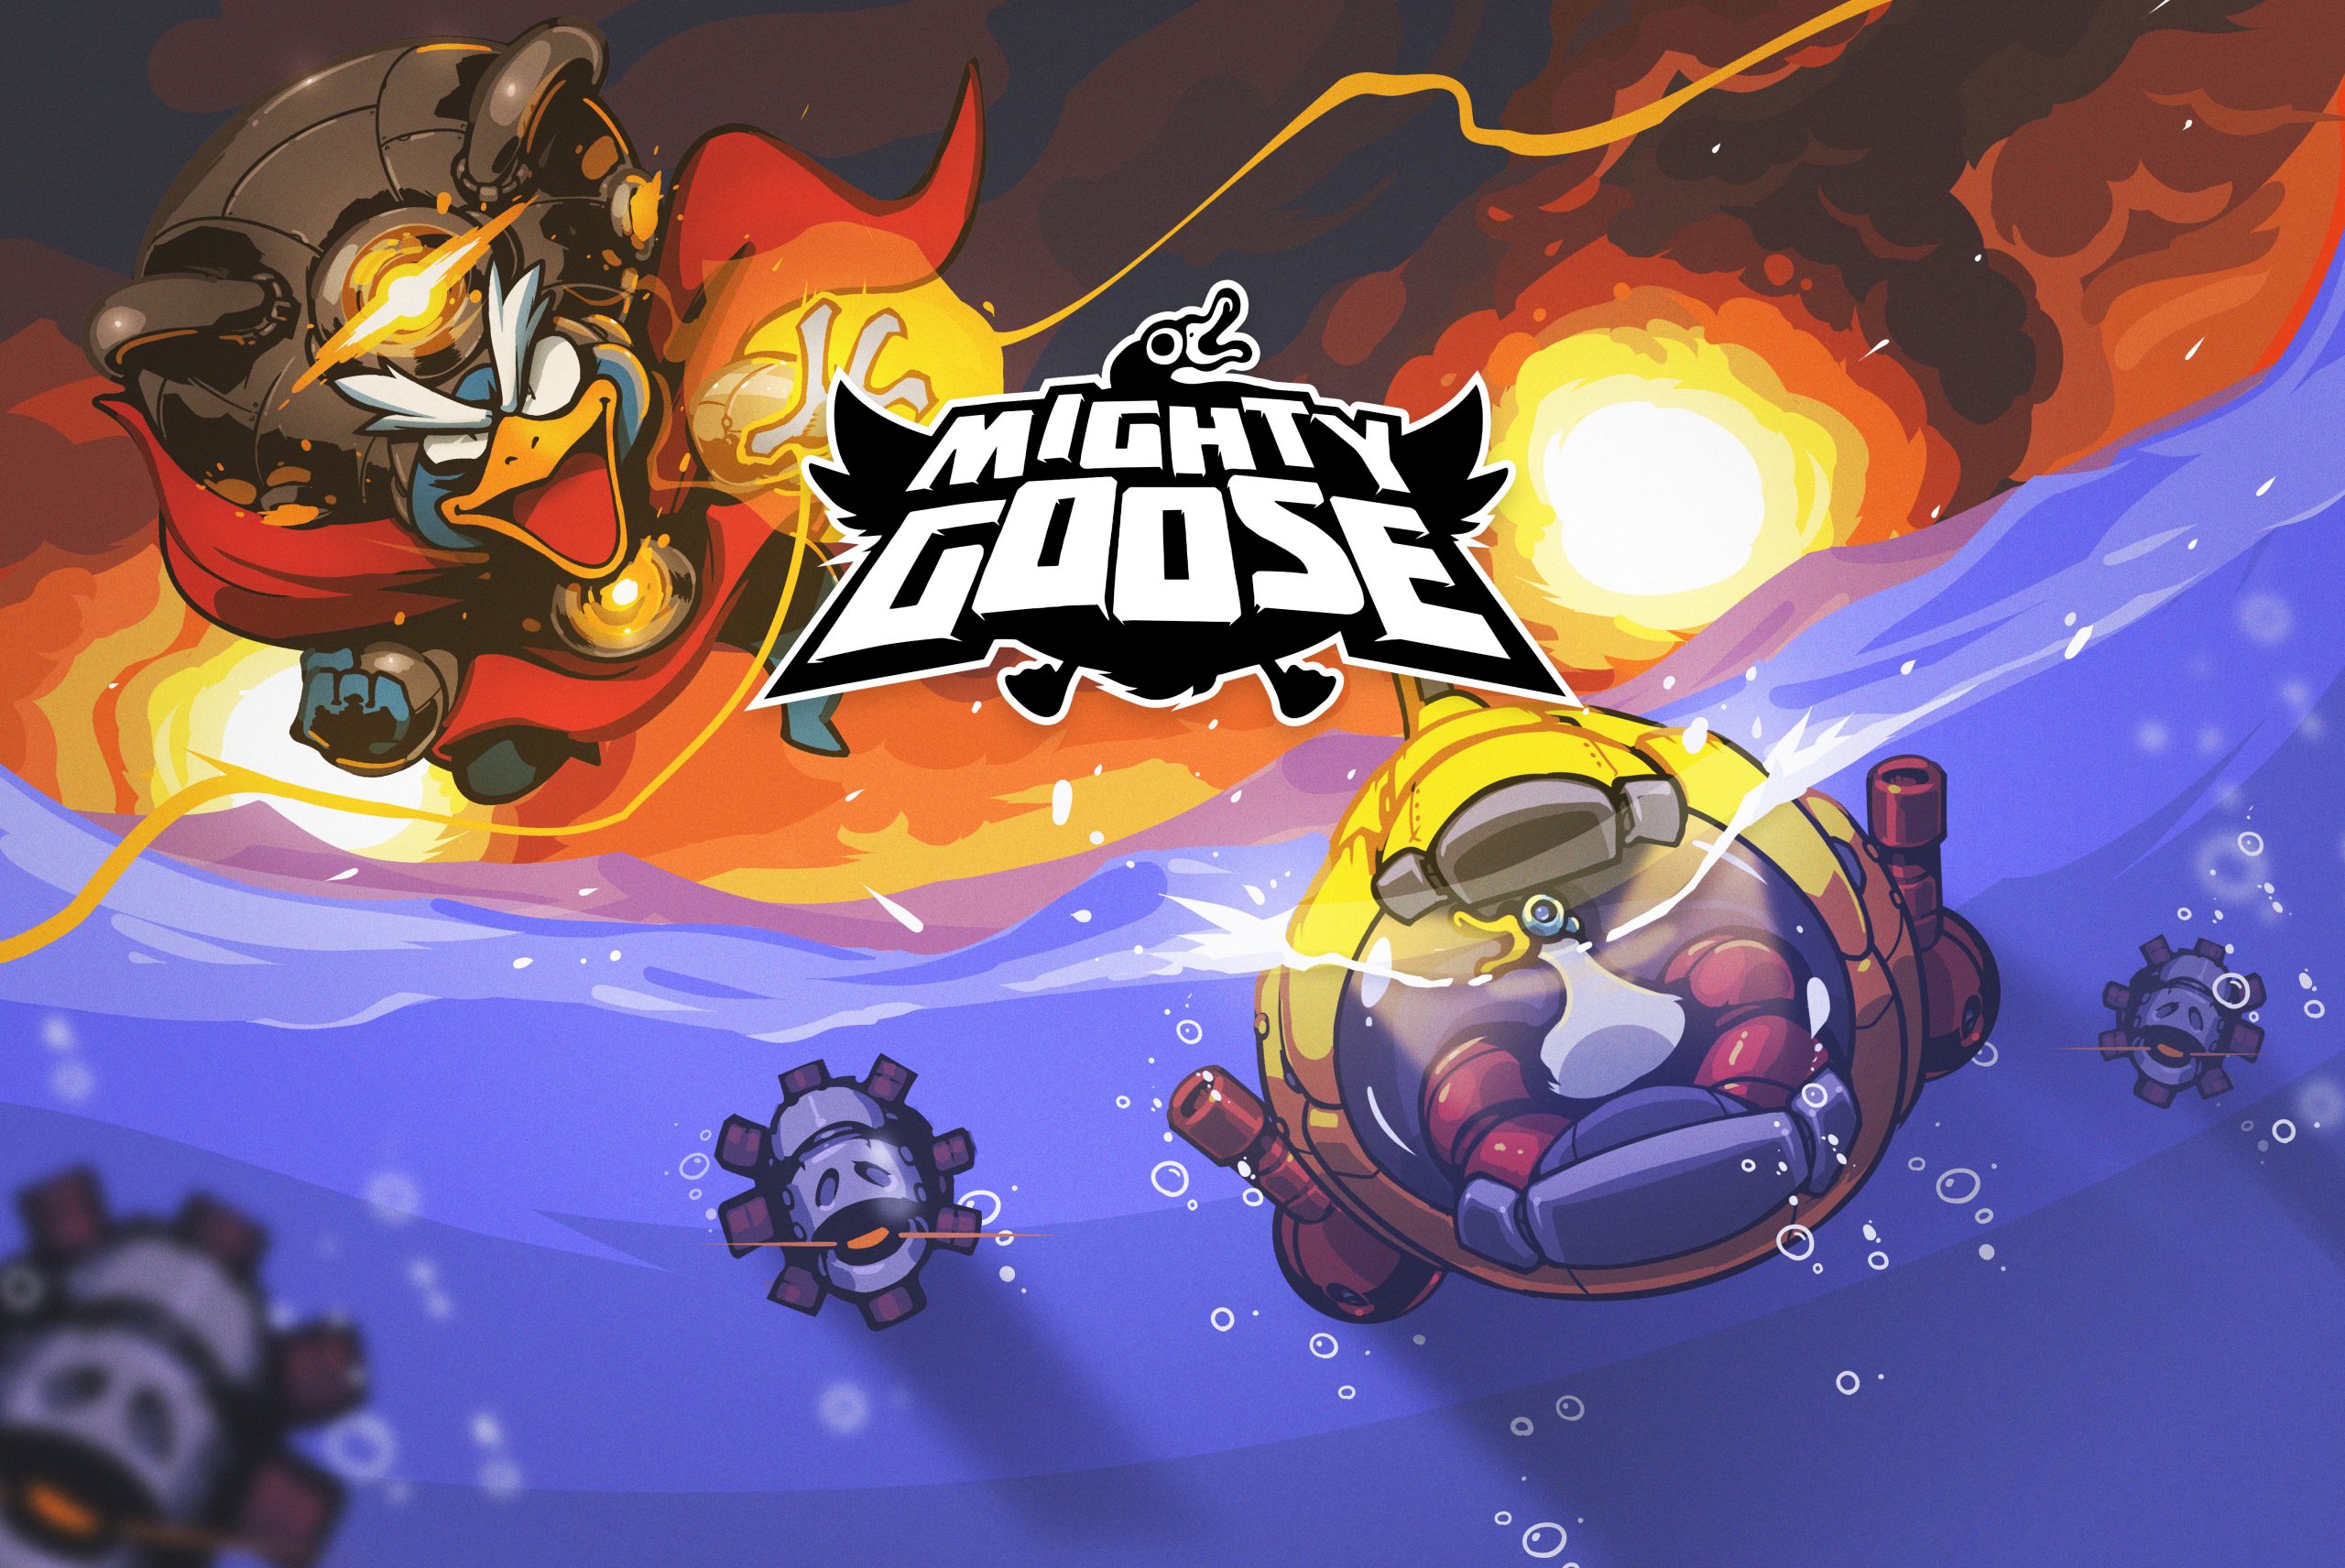 FINAL BOSS DEFEATED, Angry Birds Epic